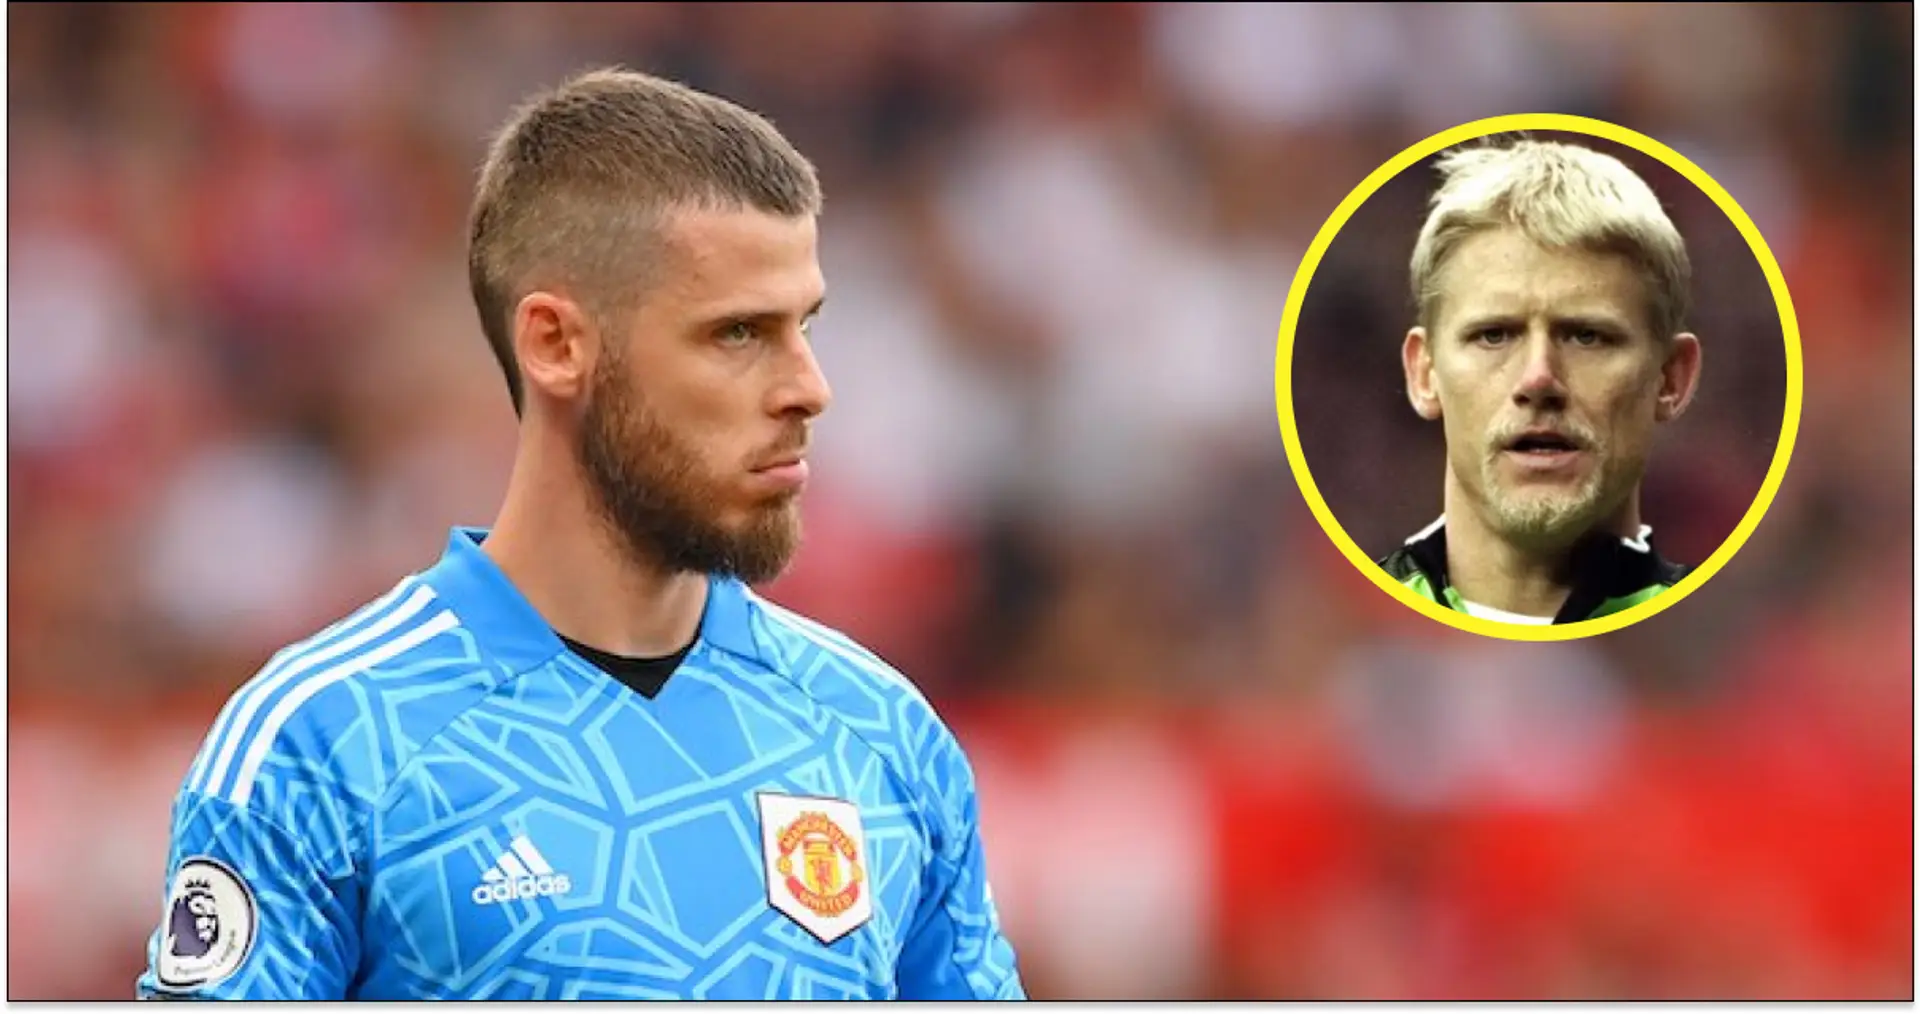 De Gea makes 400th league appearance for United — here's how many clean sheets he needs to match Schmeichel's record